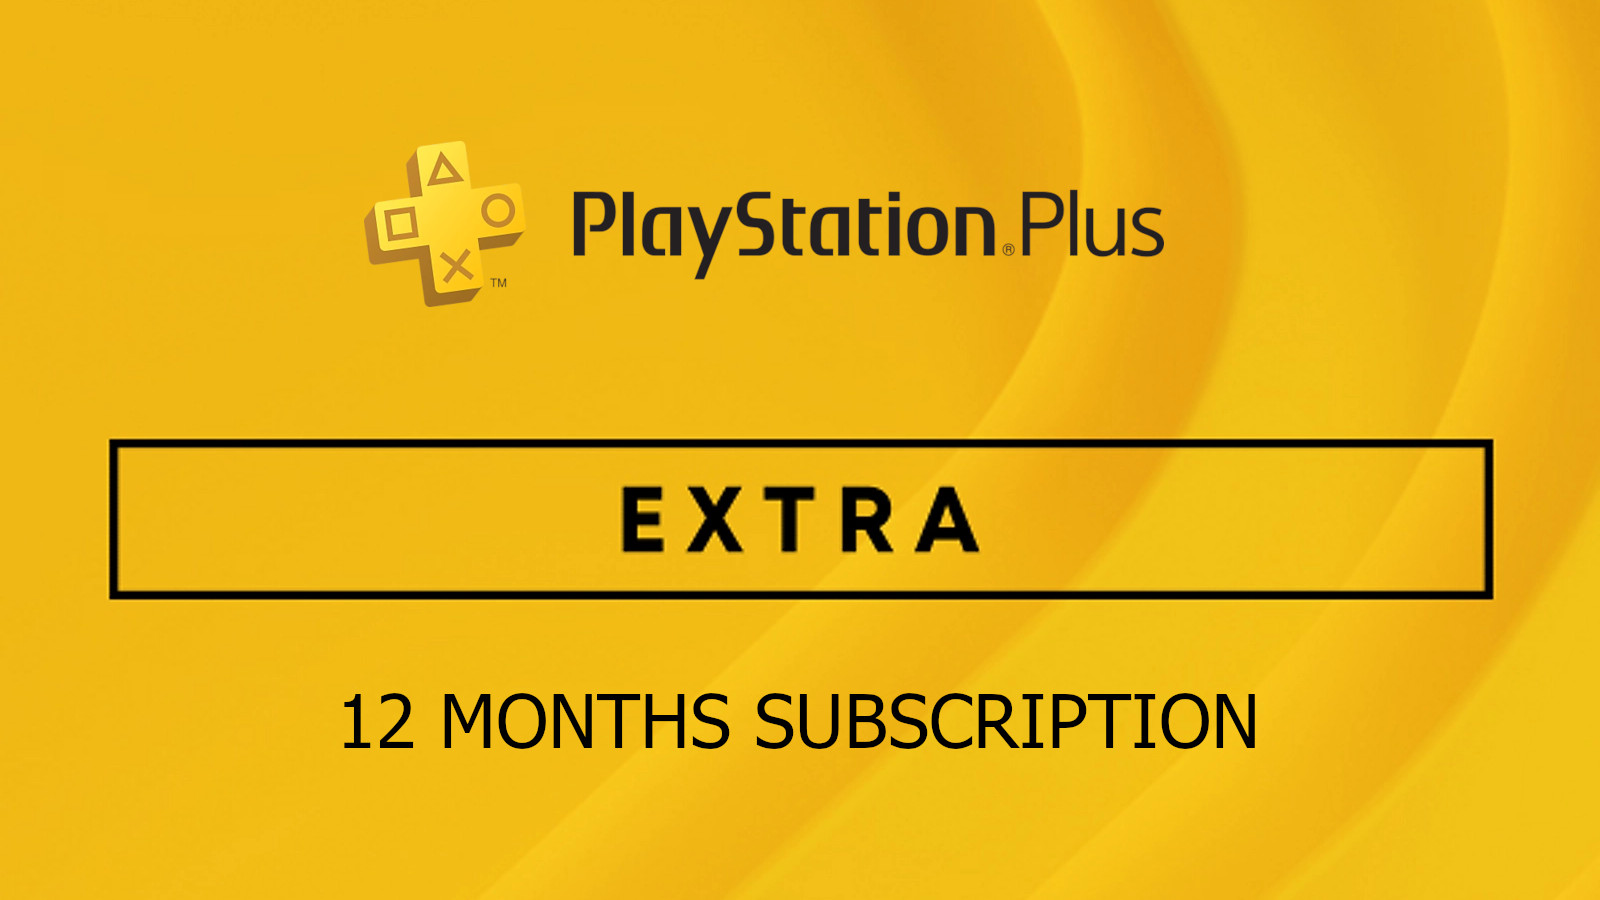 PlayStation Plus Extra 12 Months Subscription ACCOUNT 94.23 $